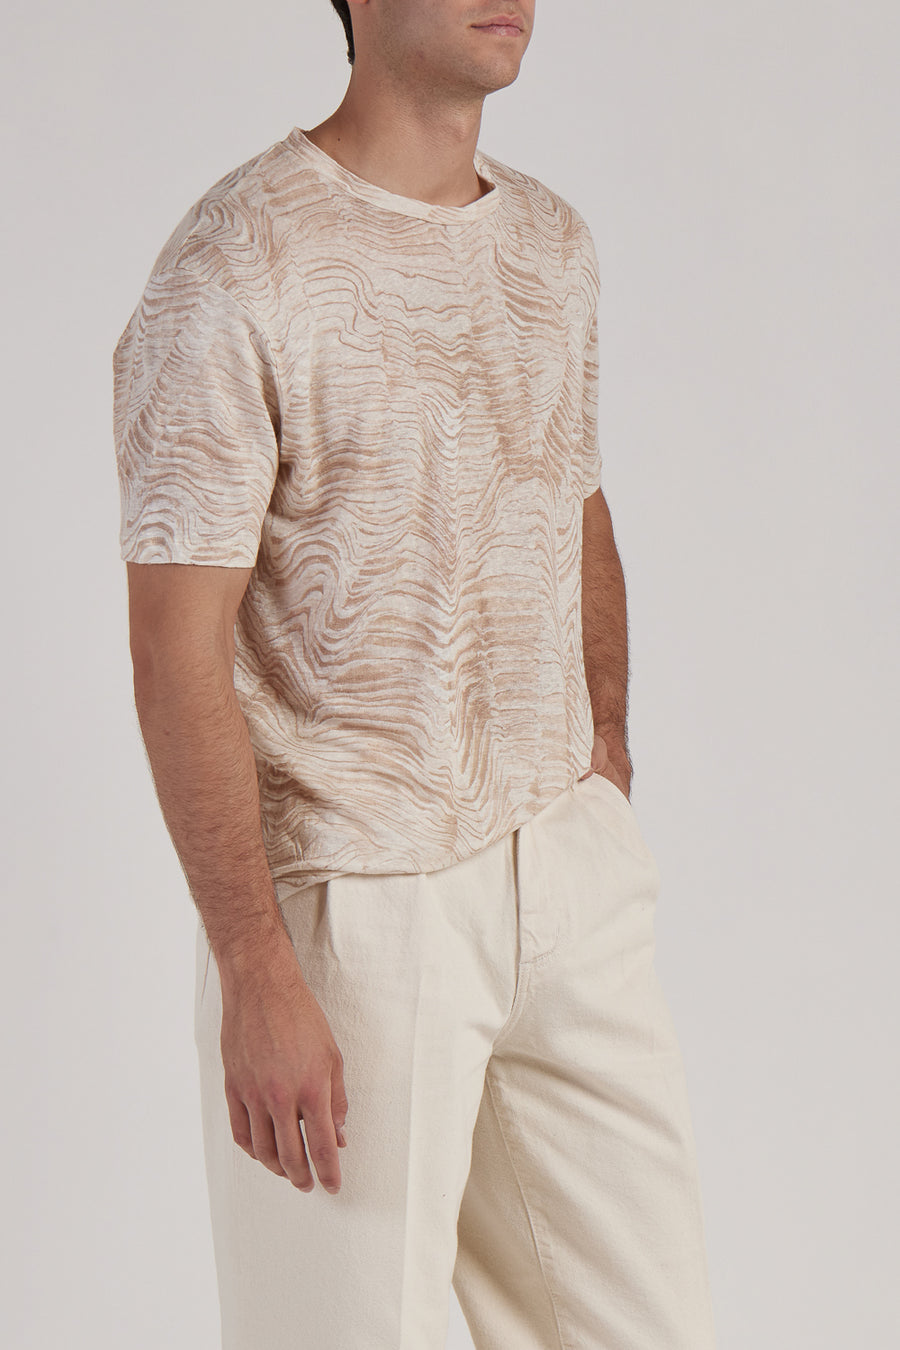 Buy the Daniele Fiesoli All Over Dunes Print Linen T-Shirt in Sand at Intro. Spend £50 for free UK delivery. Official stockists. We ship worldwide.